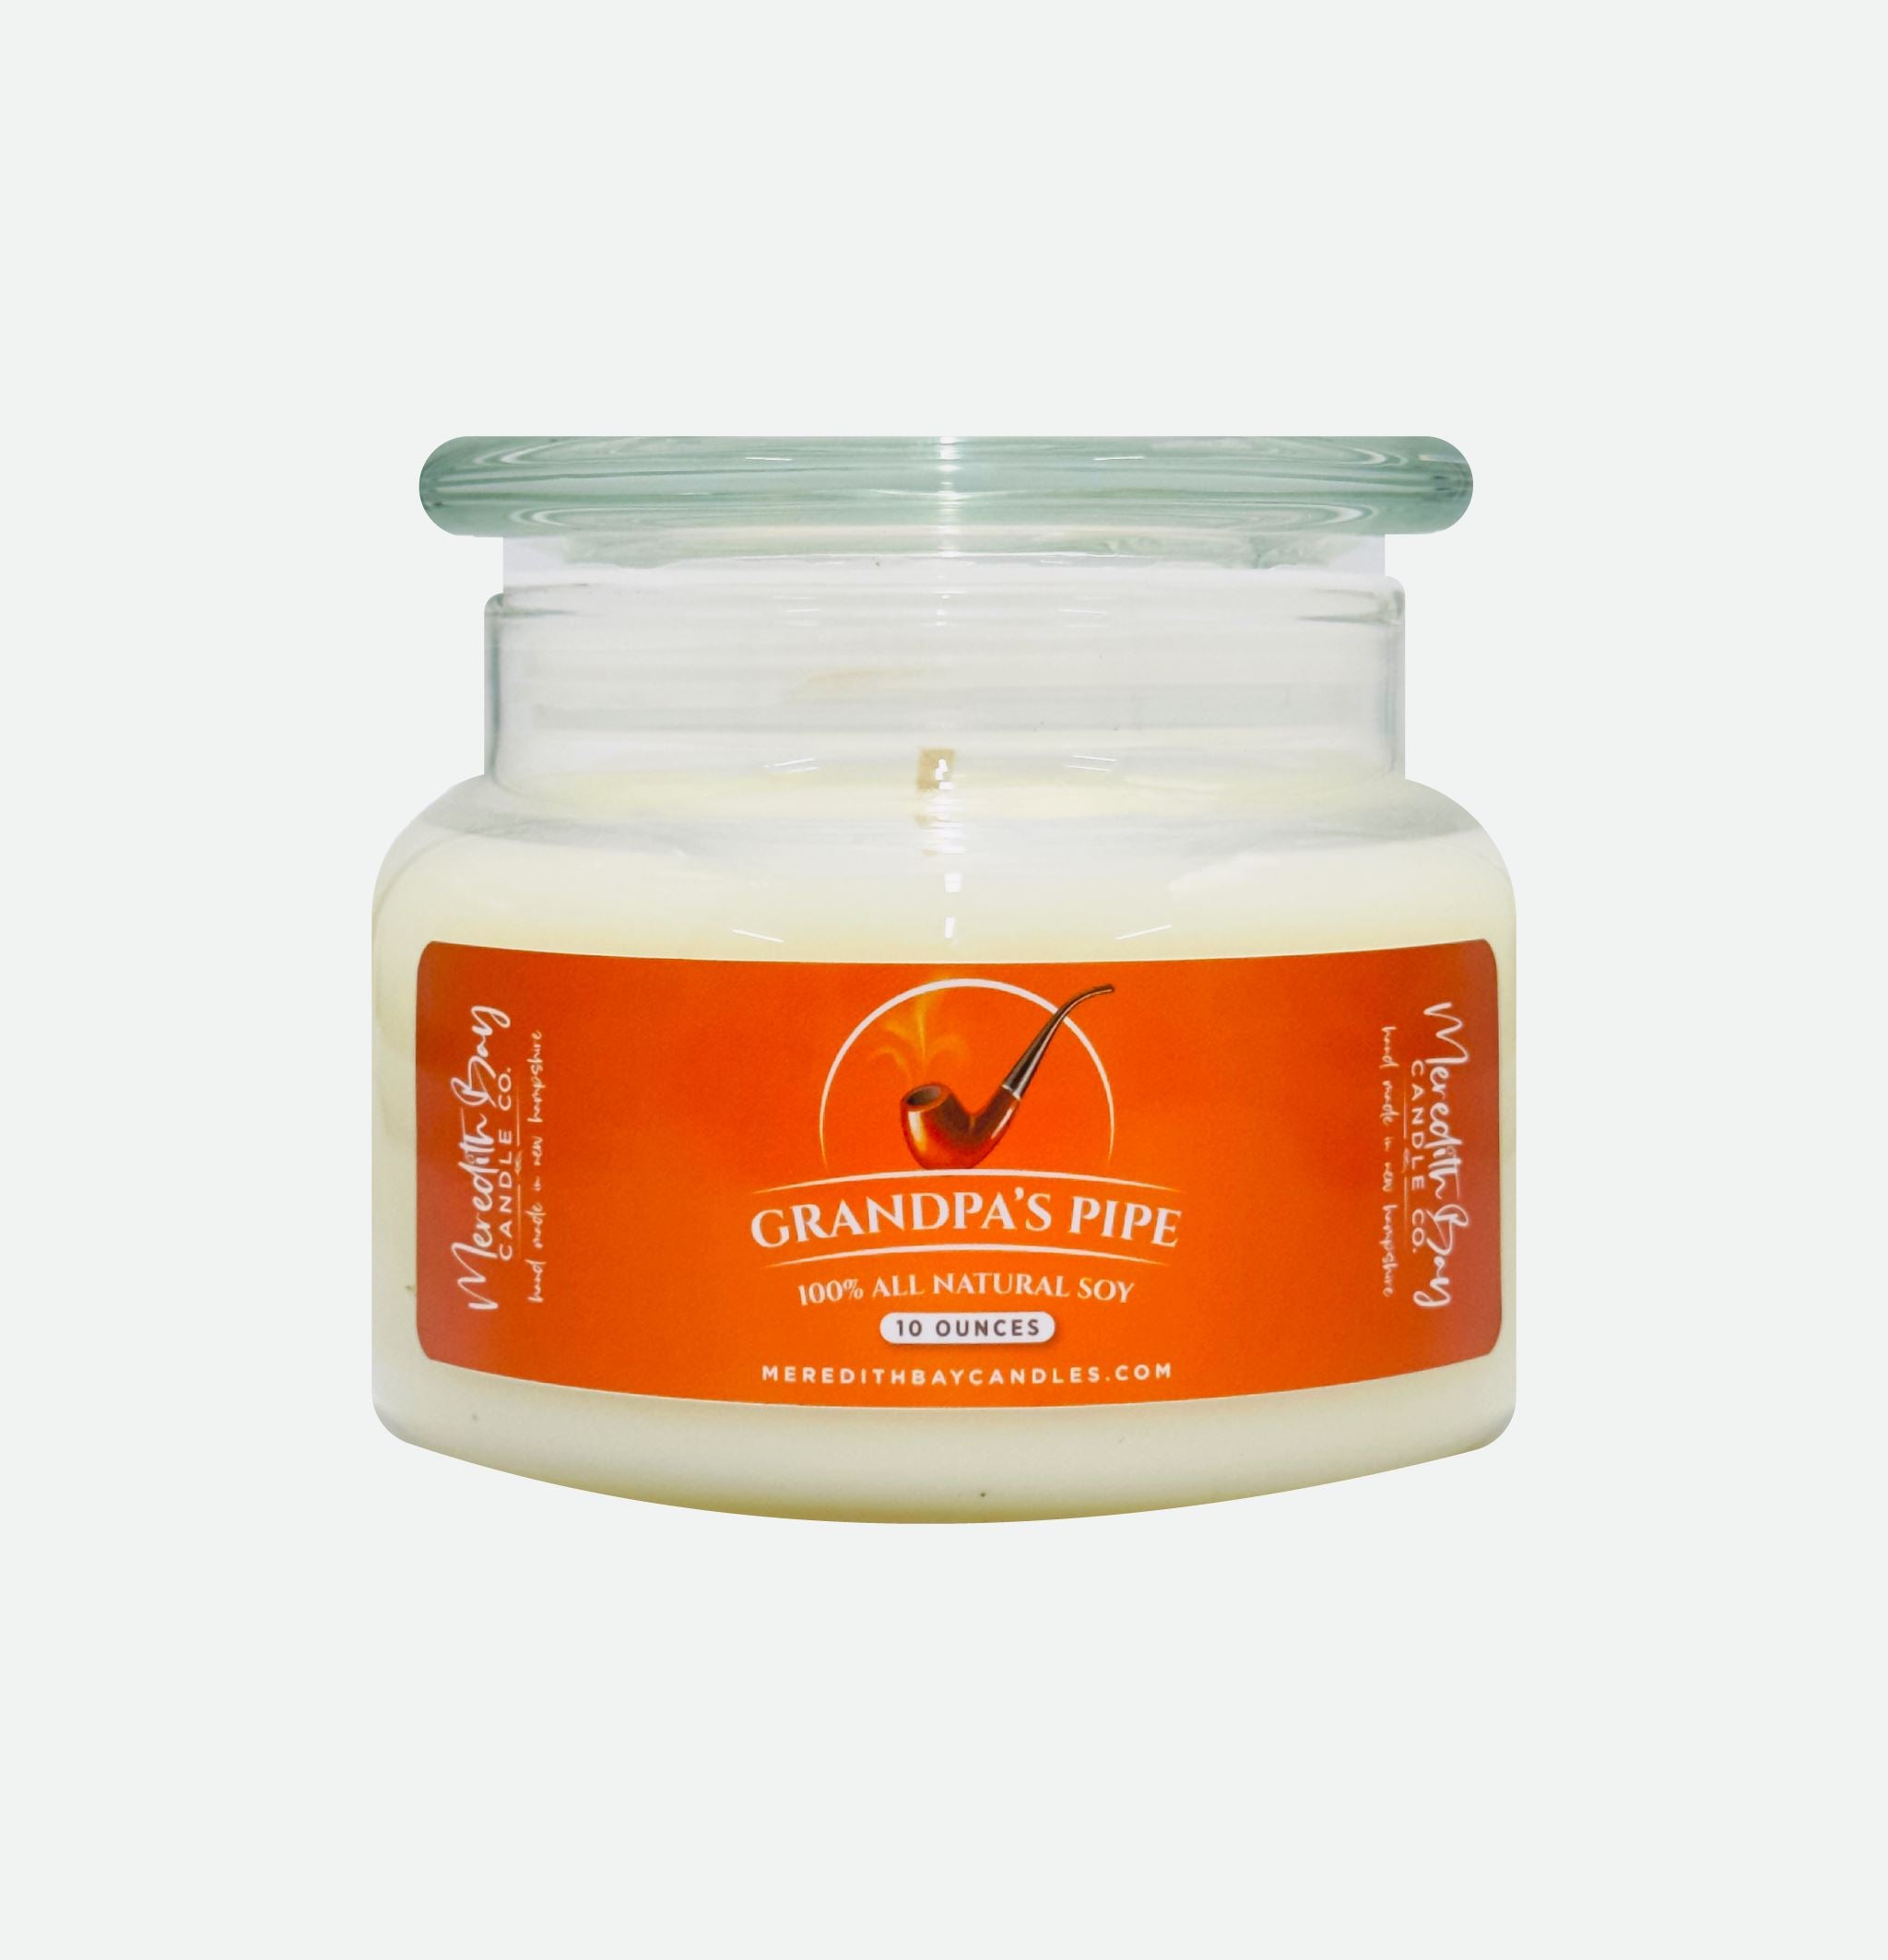 Grandpa's Pipe Soy Candle Meredith Bay Candle Co 10 Oz 